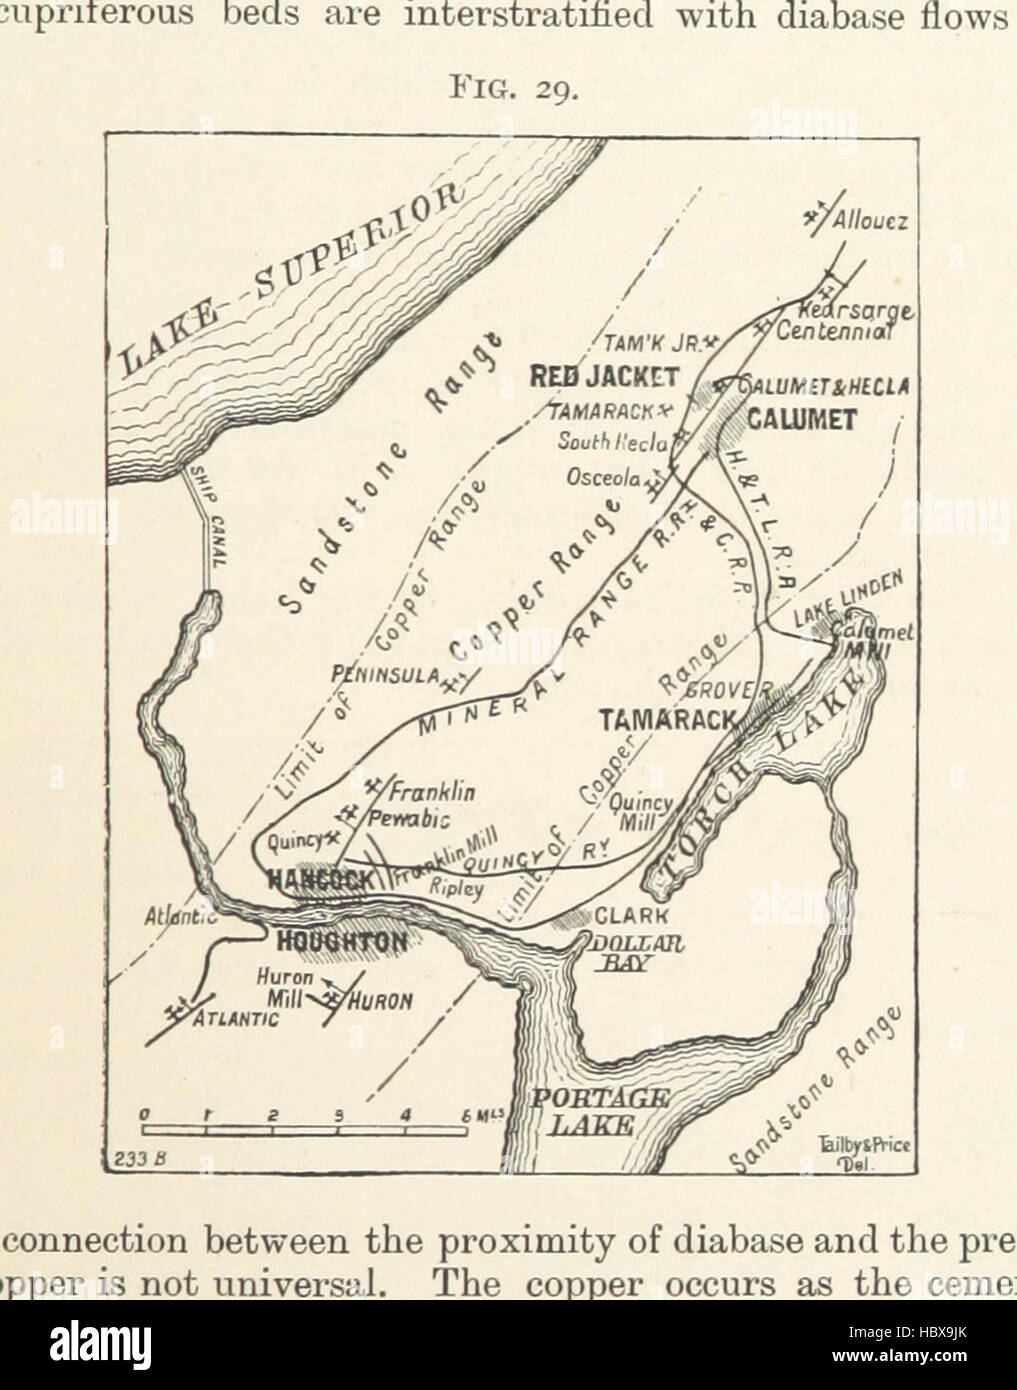 Image taken from page 69 of 'A Text-book of Ore and Stone Mining ... With frontispiece and 716 illustrations' Image taken from page 69 of 'A Text-book of Ore Stock Photo